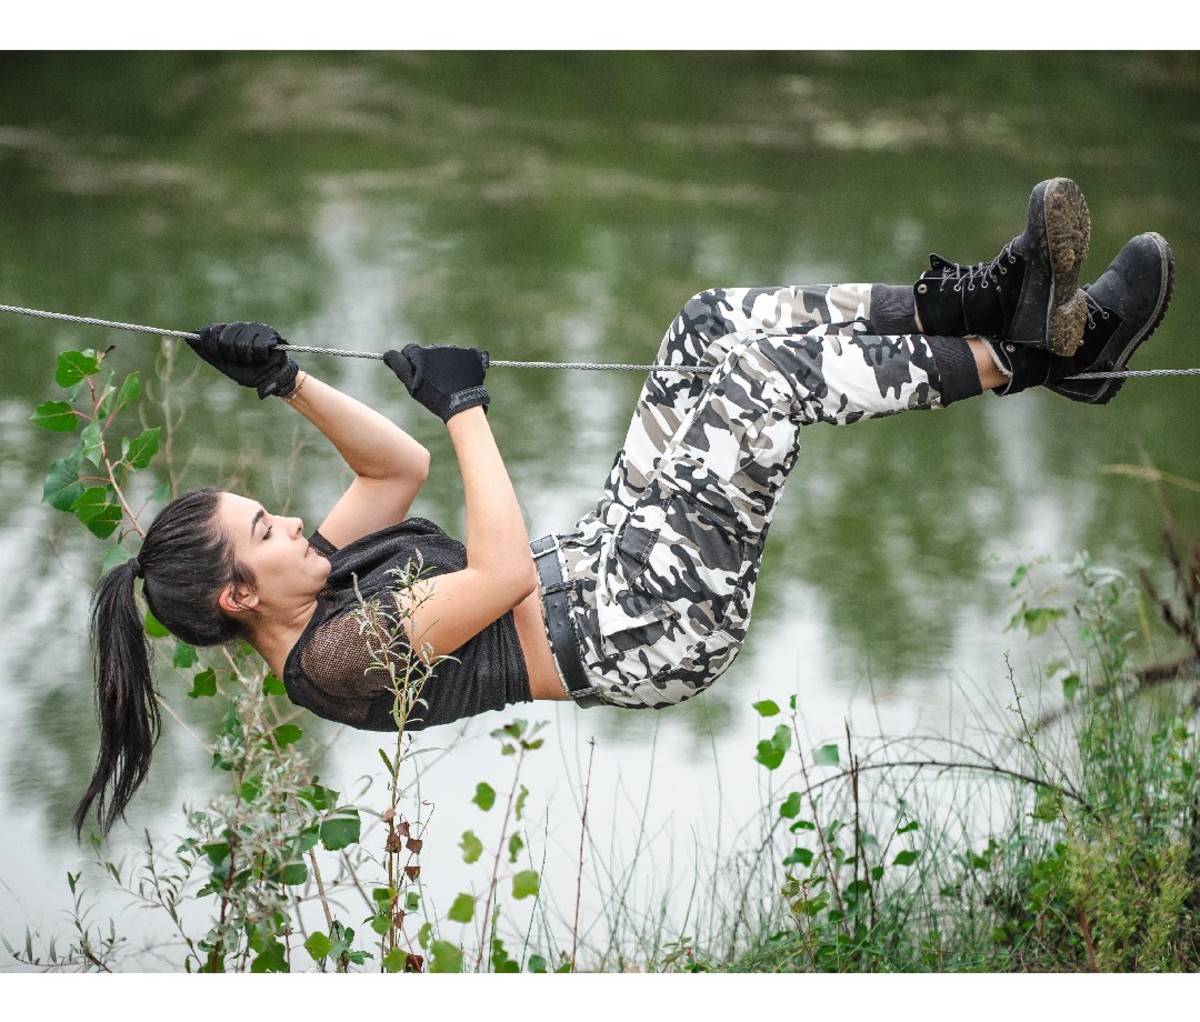 Female soldier climbs across a rope bridge over water.